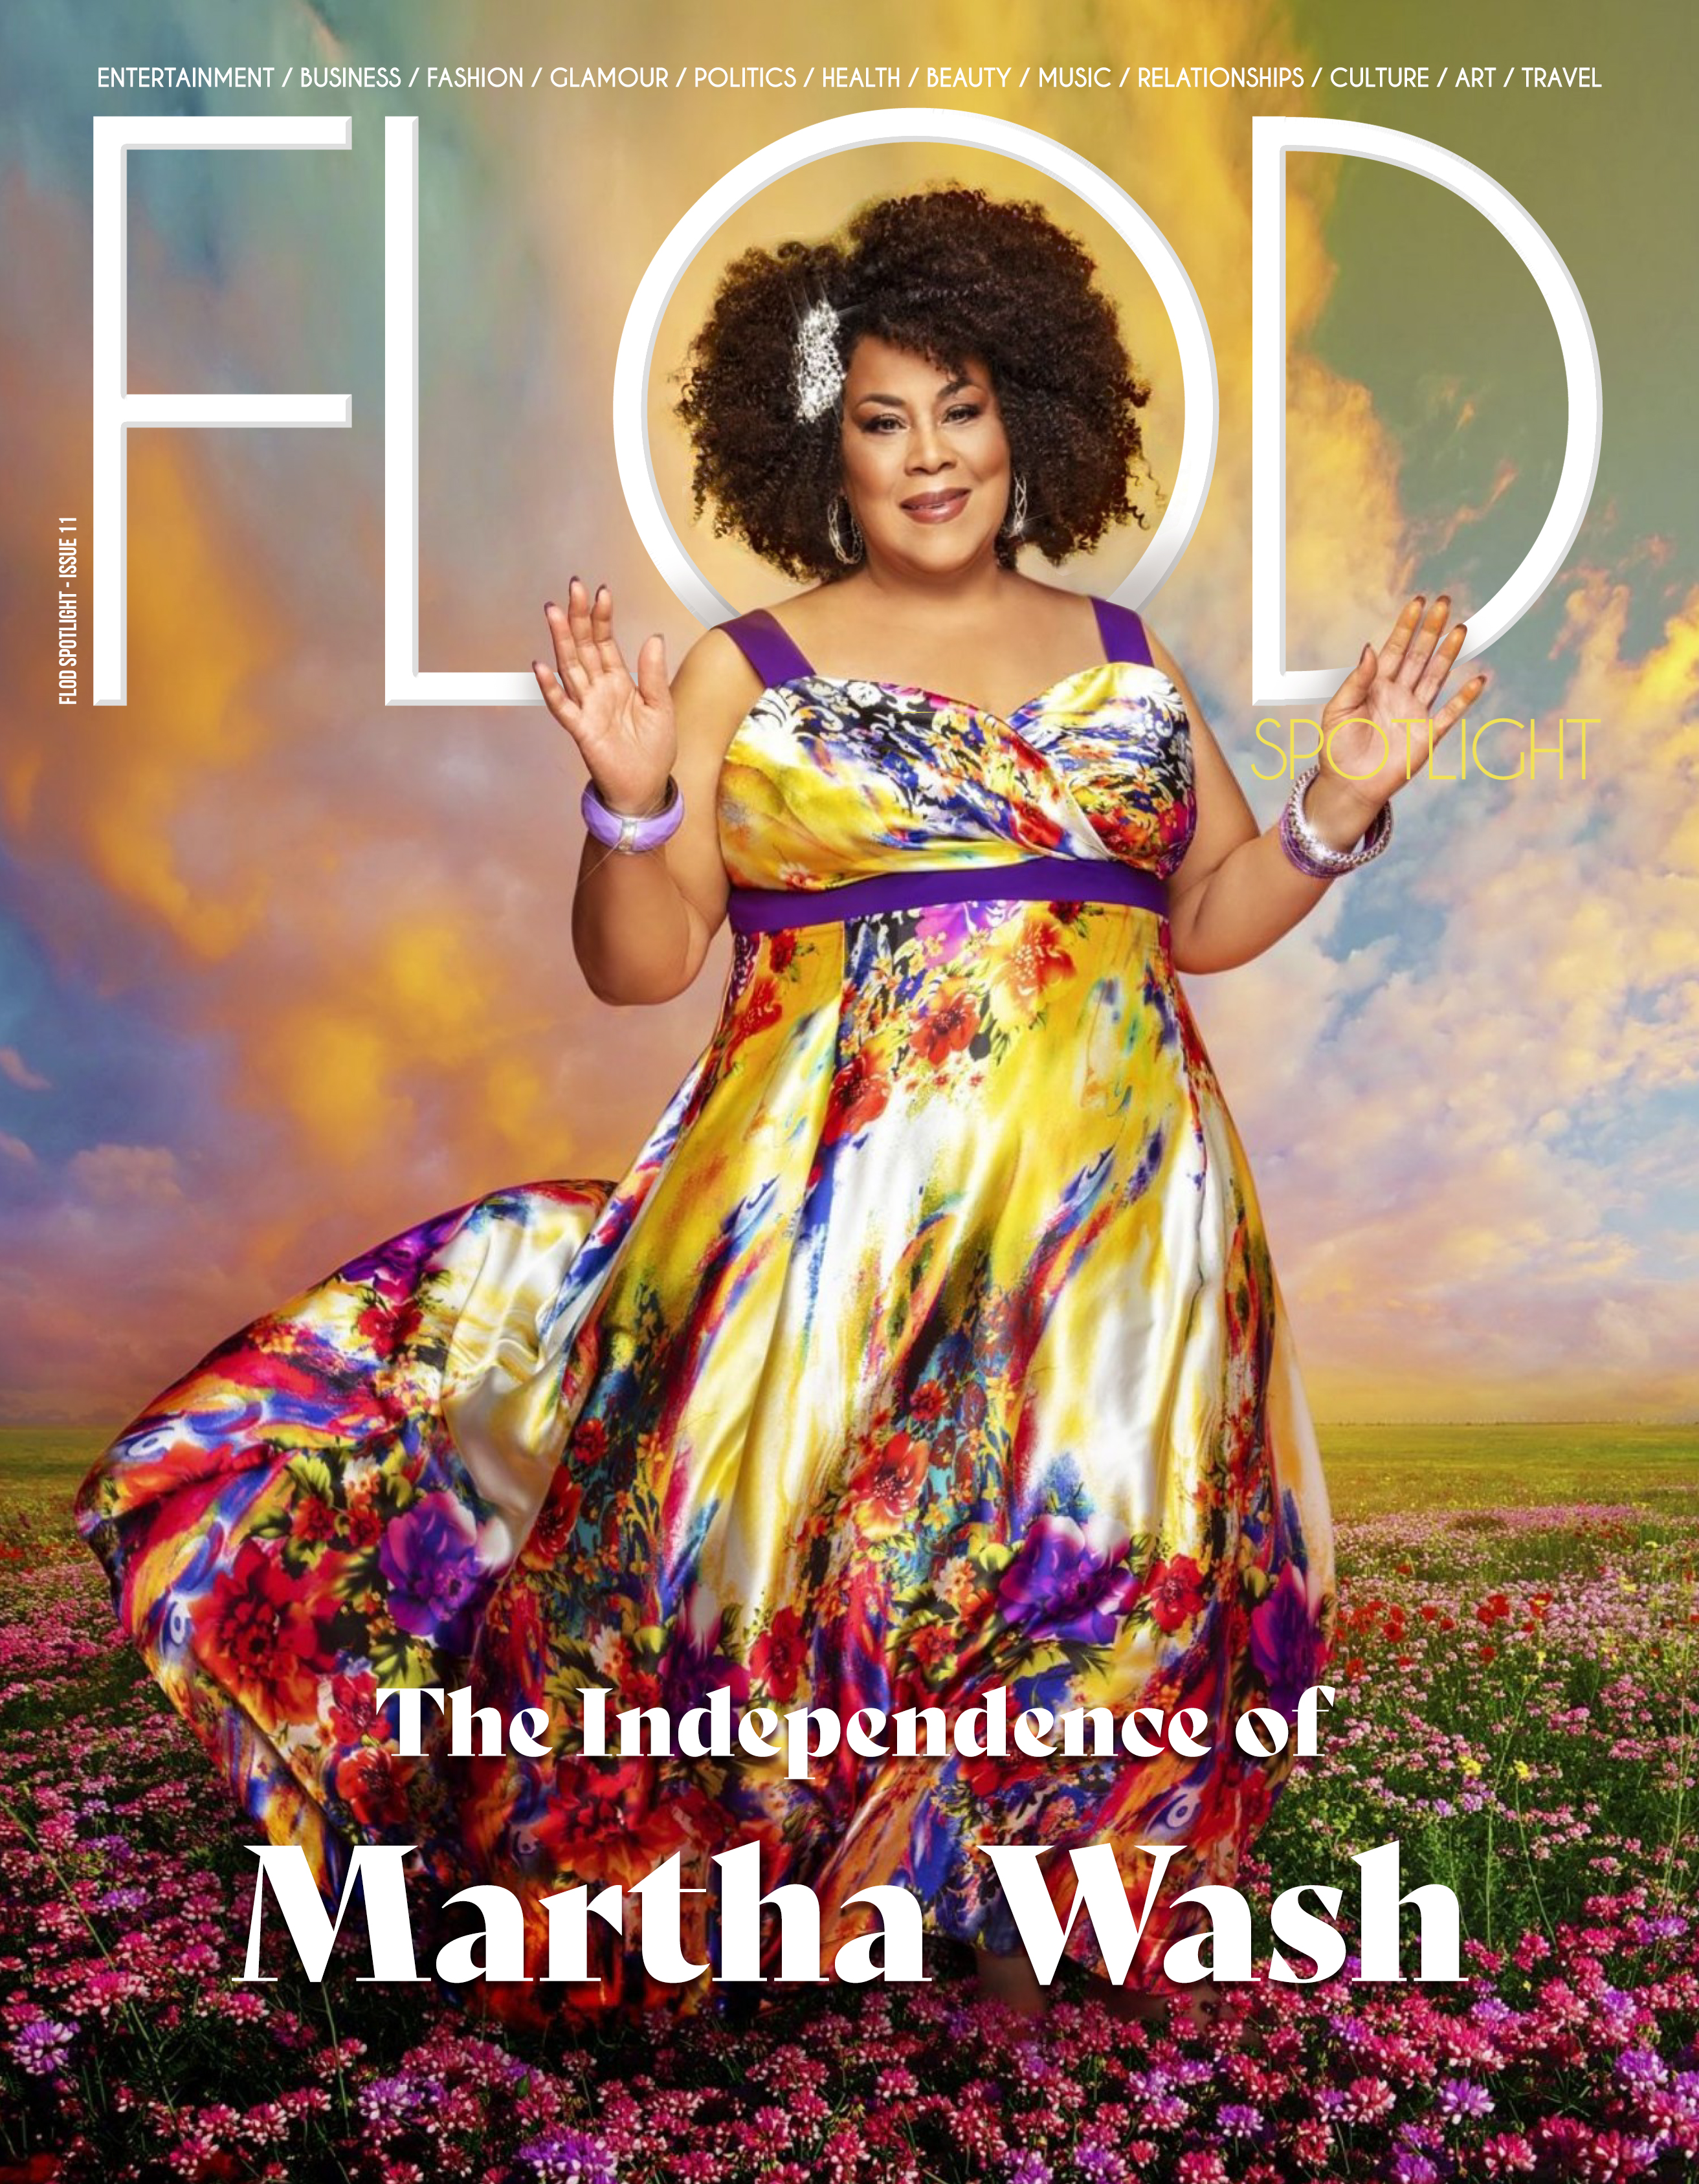 Issue 11 – The Independence of Martha Wash